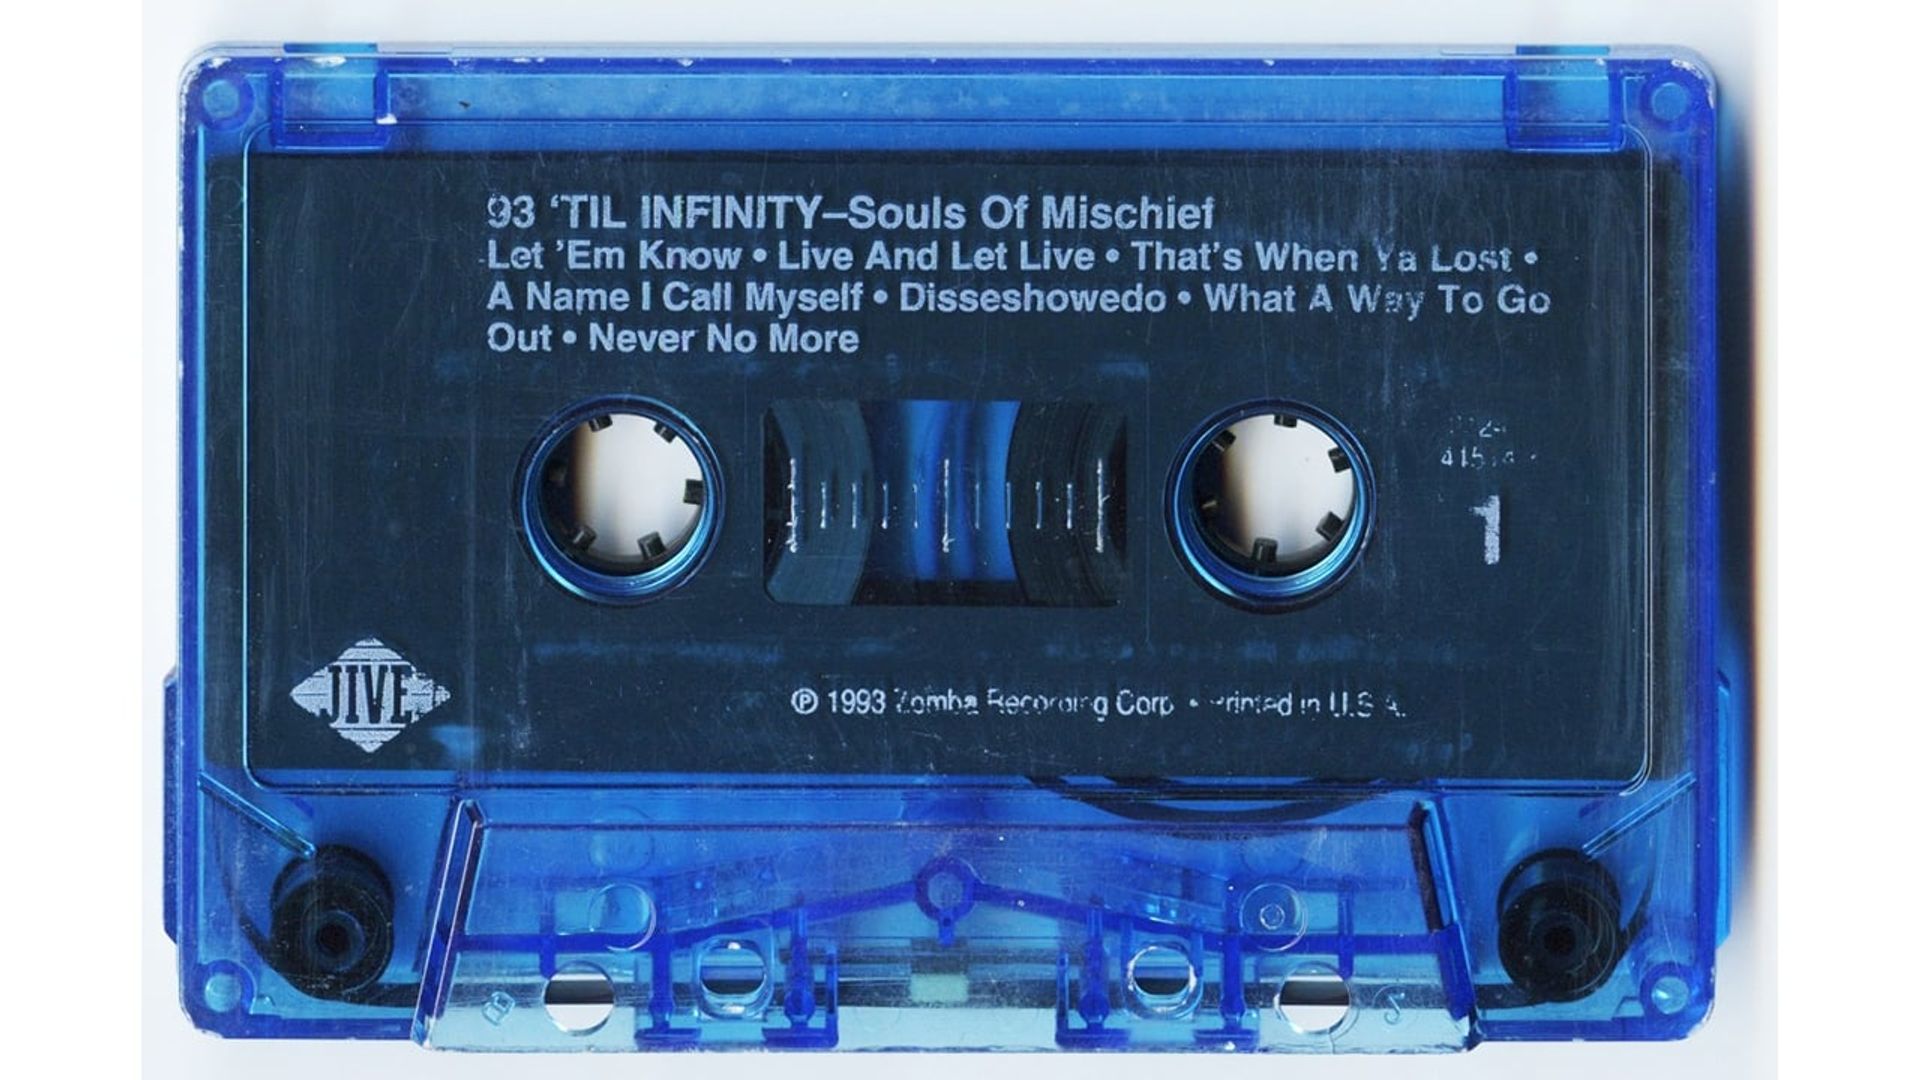 Til Infinity: The Souls of Mischief background